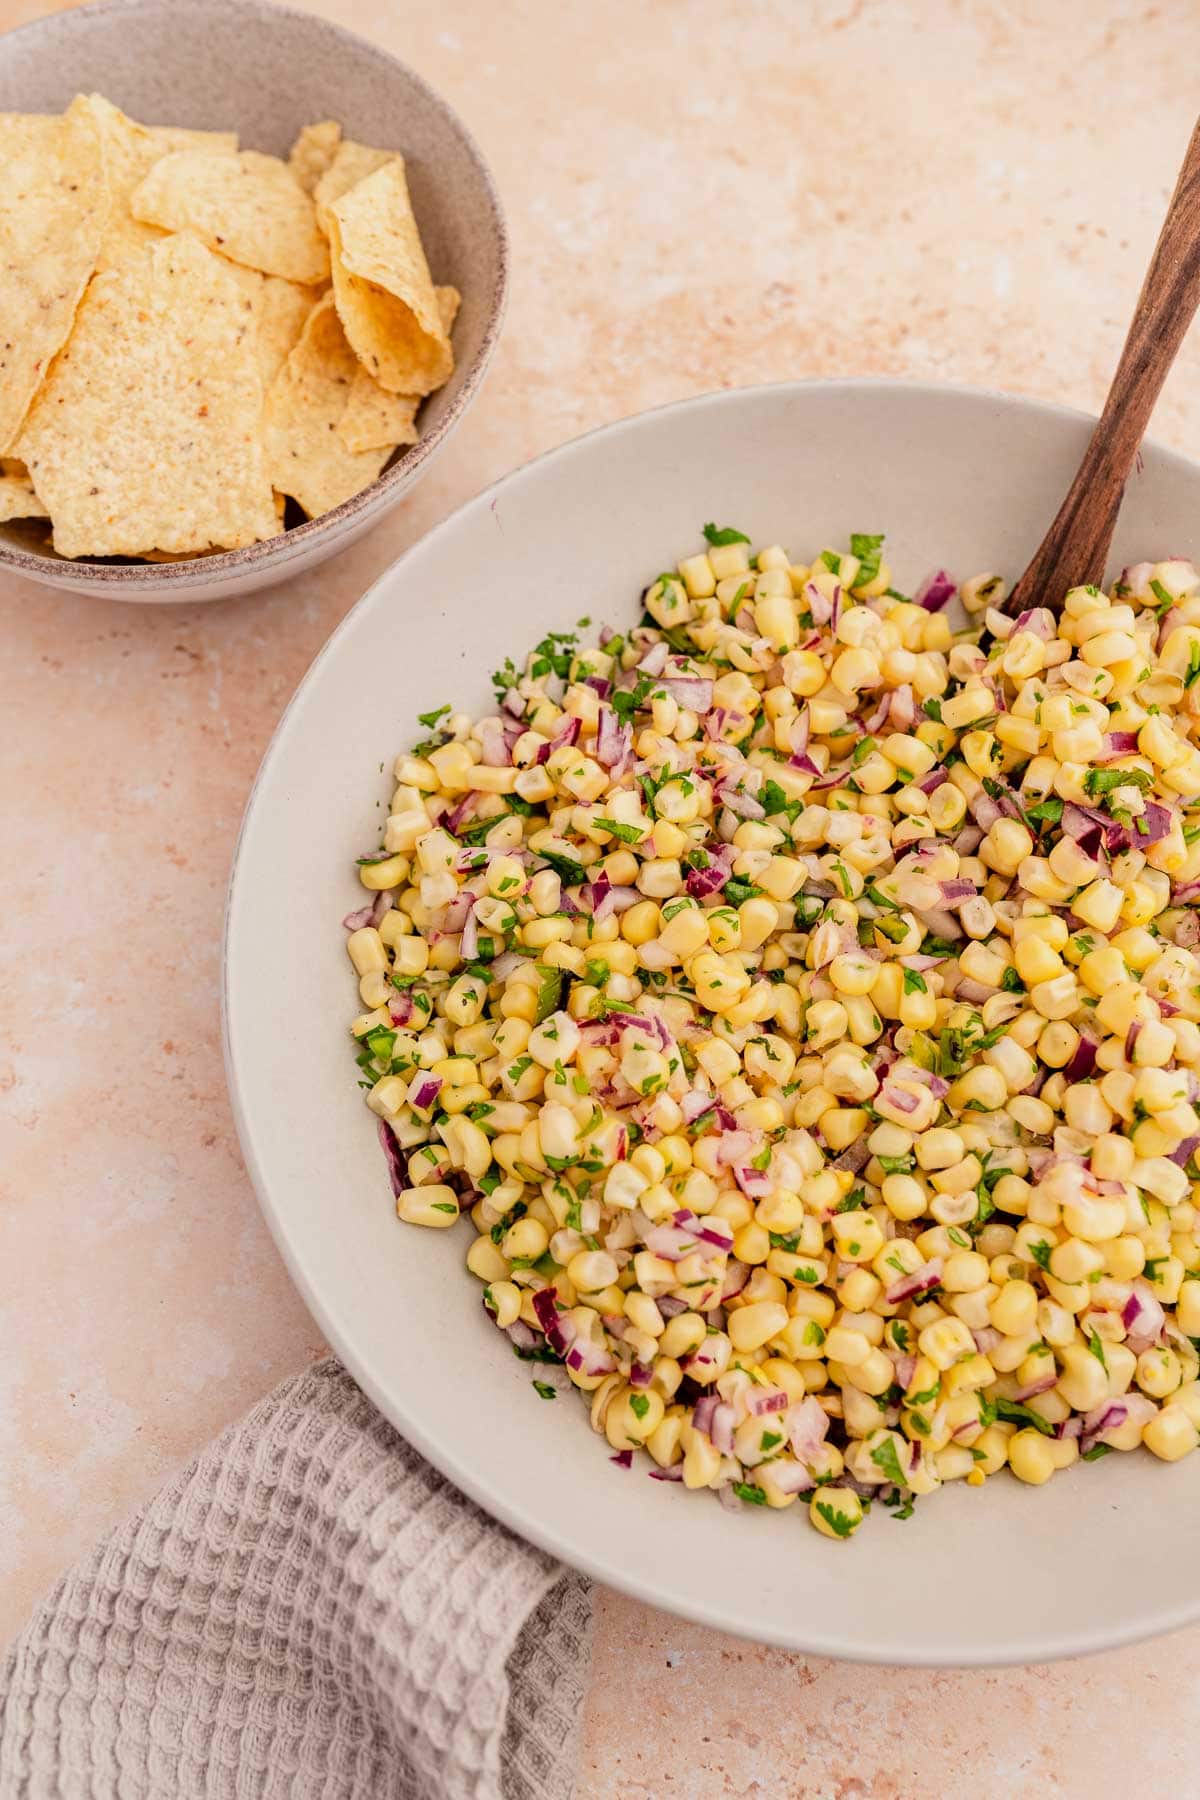 A bowl of chipotle corn salsa with tortilla chips and a wooden spoon.